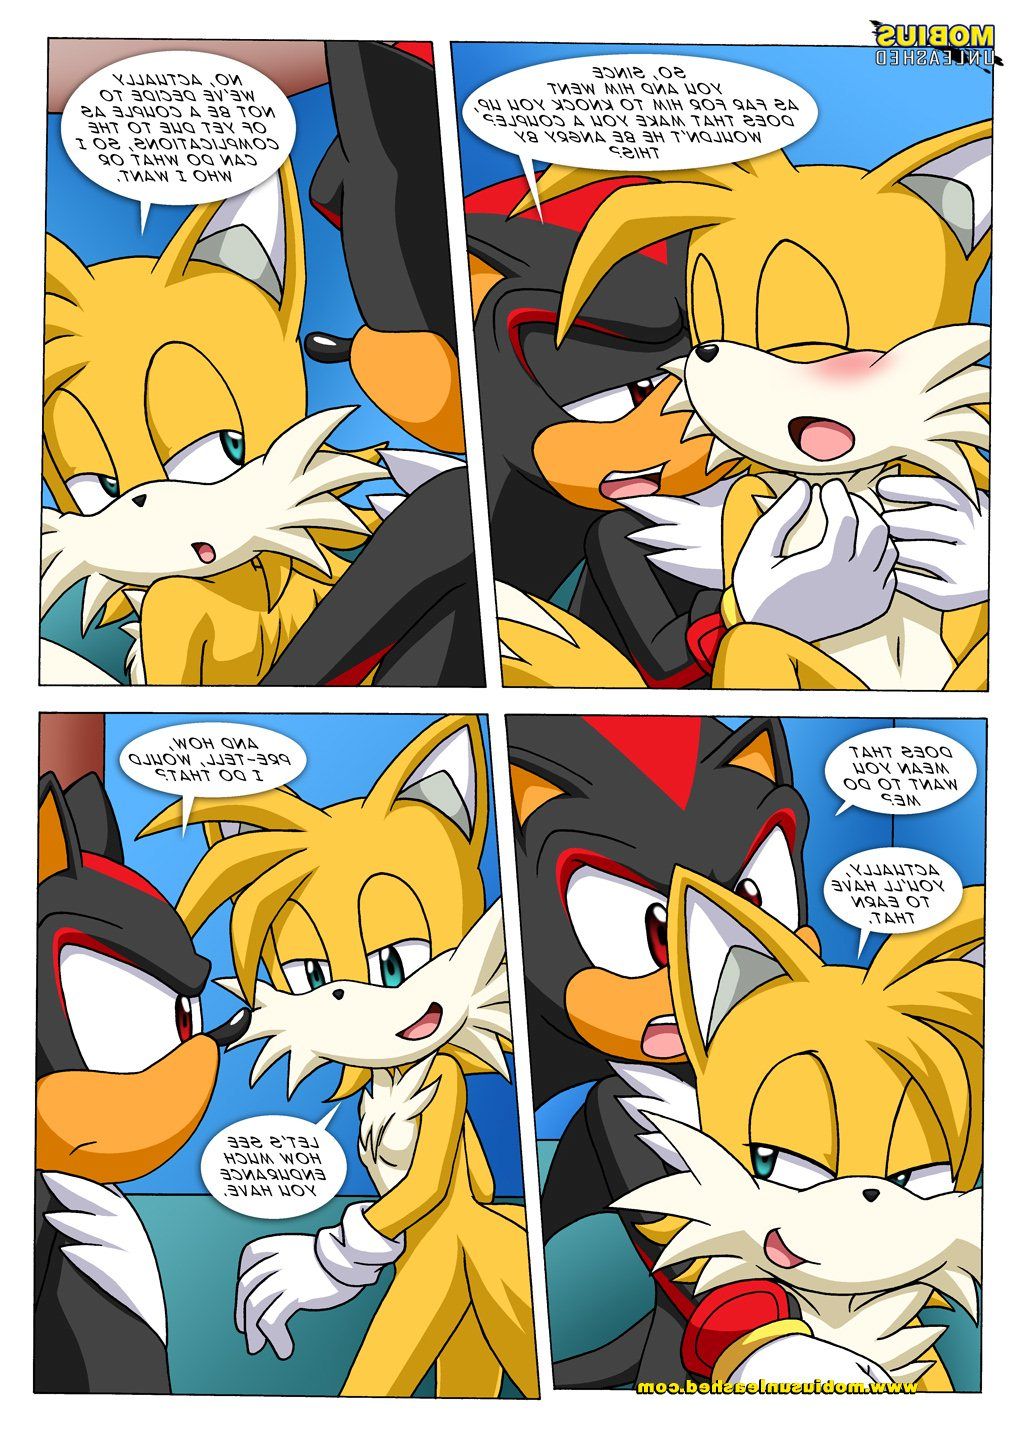 tails-tales-2 image_13440.jpg